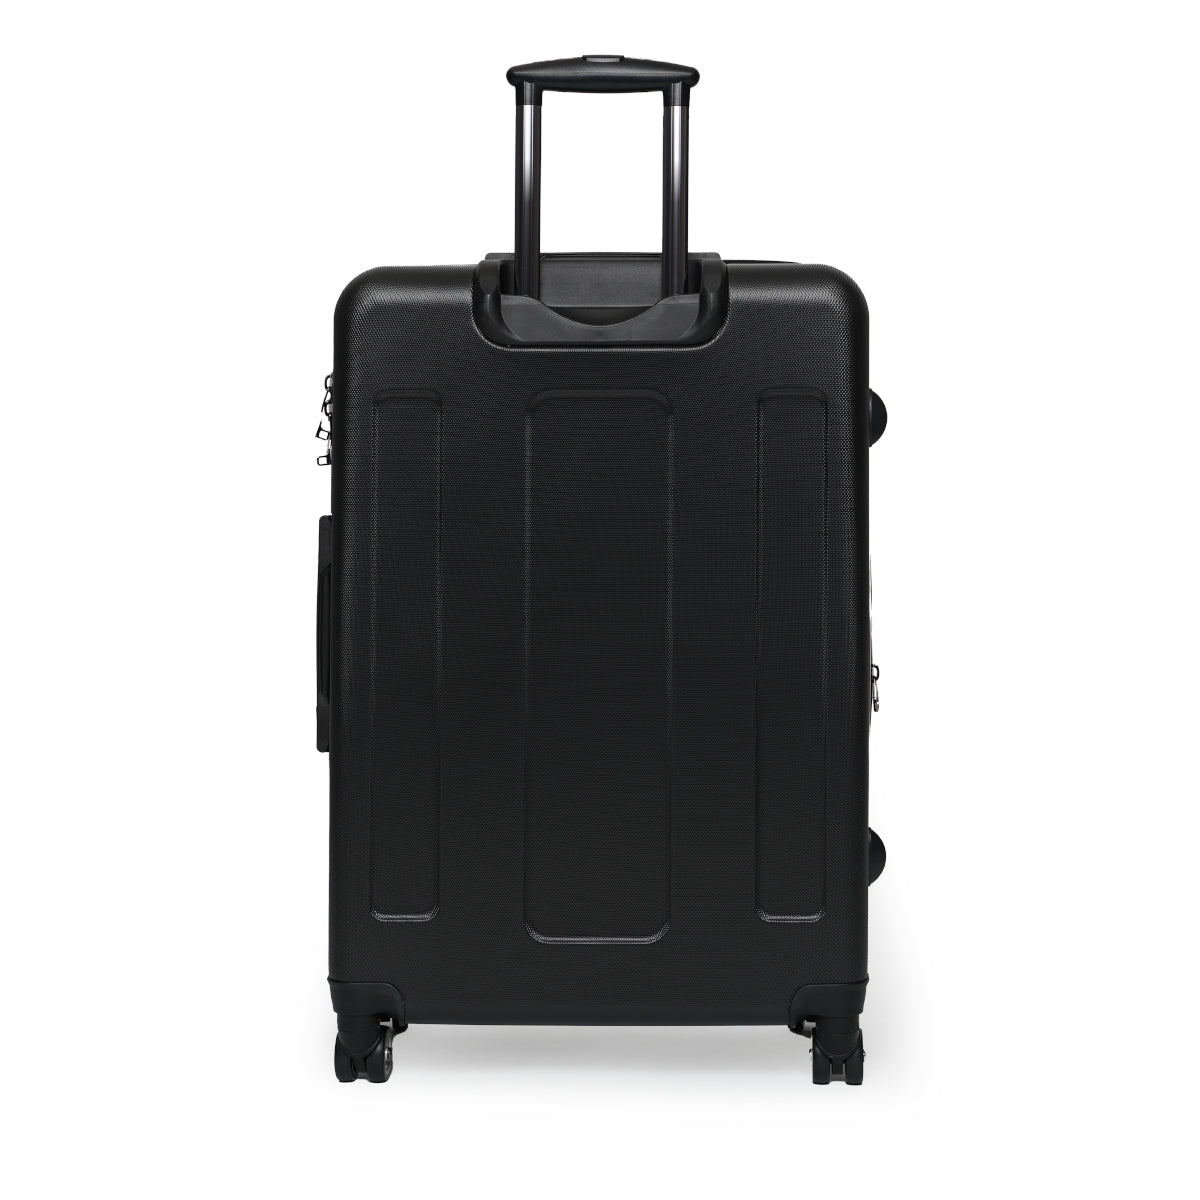 Getrott Aretha Franklyn I Never Loved a Man The Way that I Love You Black Cabin Suitcase Inner Pockets Extended Storage Adjustable Telescopic Handle Inner Pockets Double wheeled Polycarbonate Hard-shell Built-in Lock